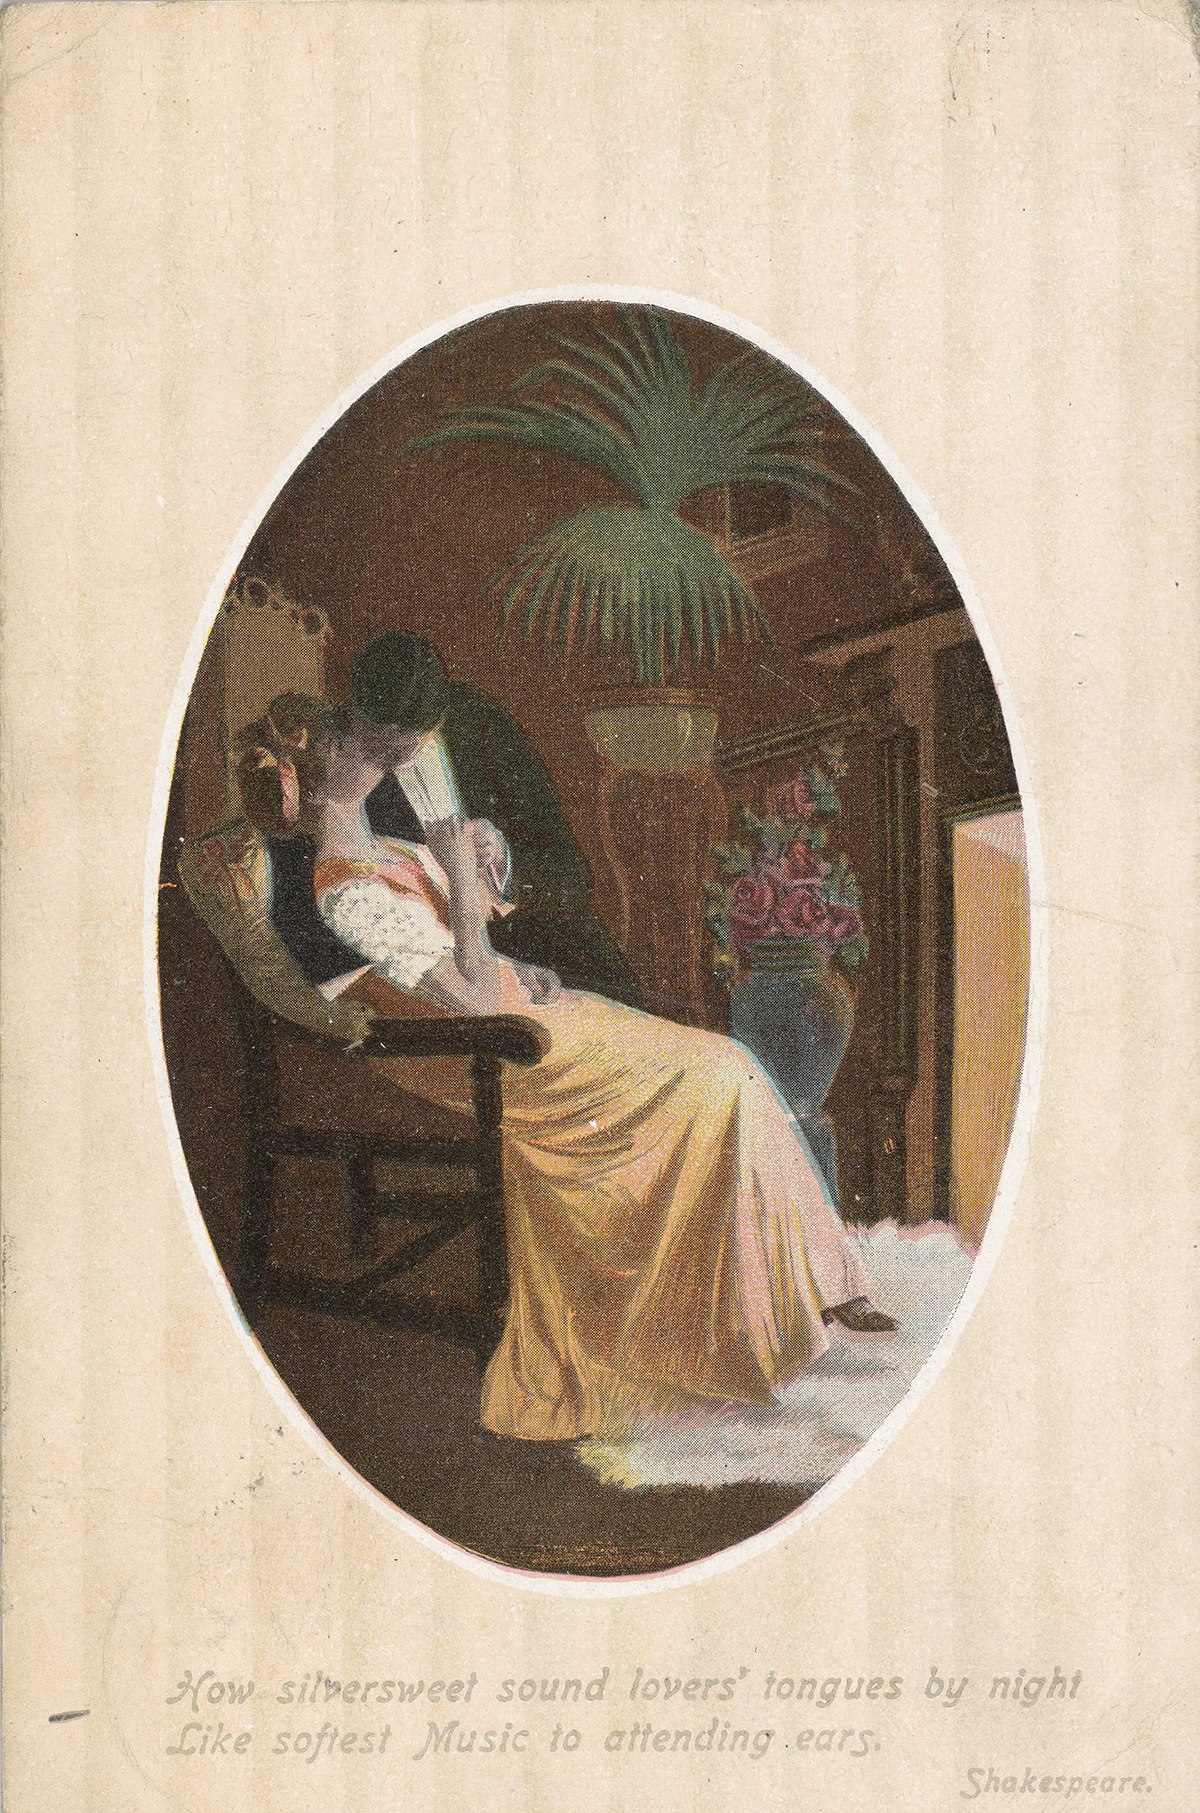 Postcard of a couple kissing with a Shakespeare quote, 28 Jan 1910, PH64W/13